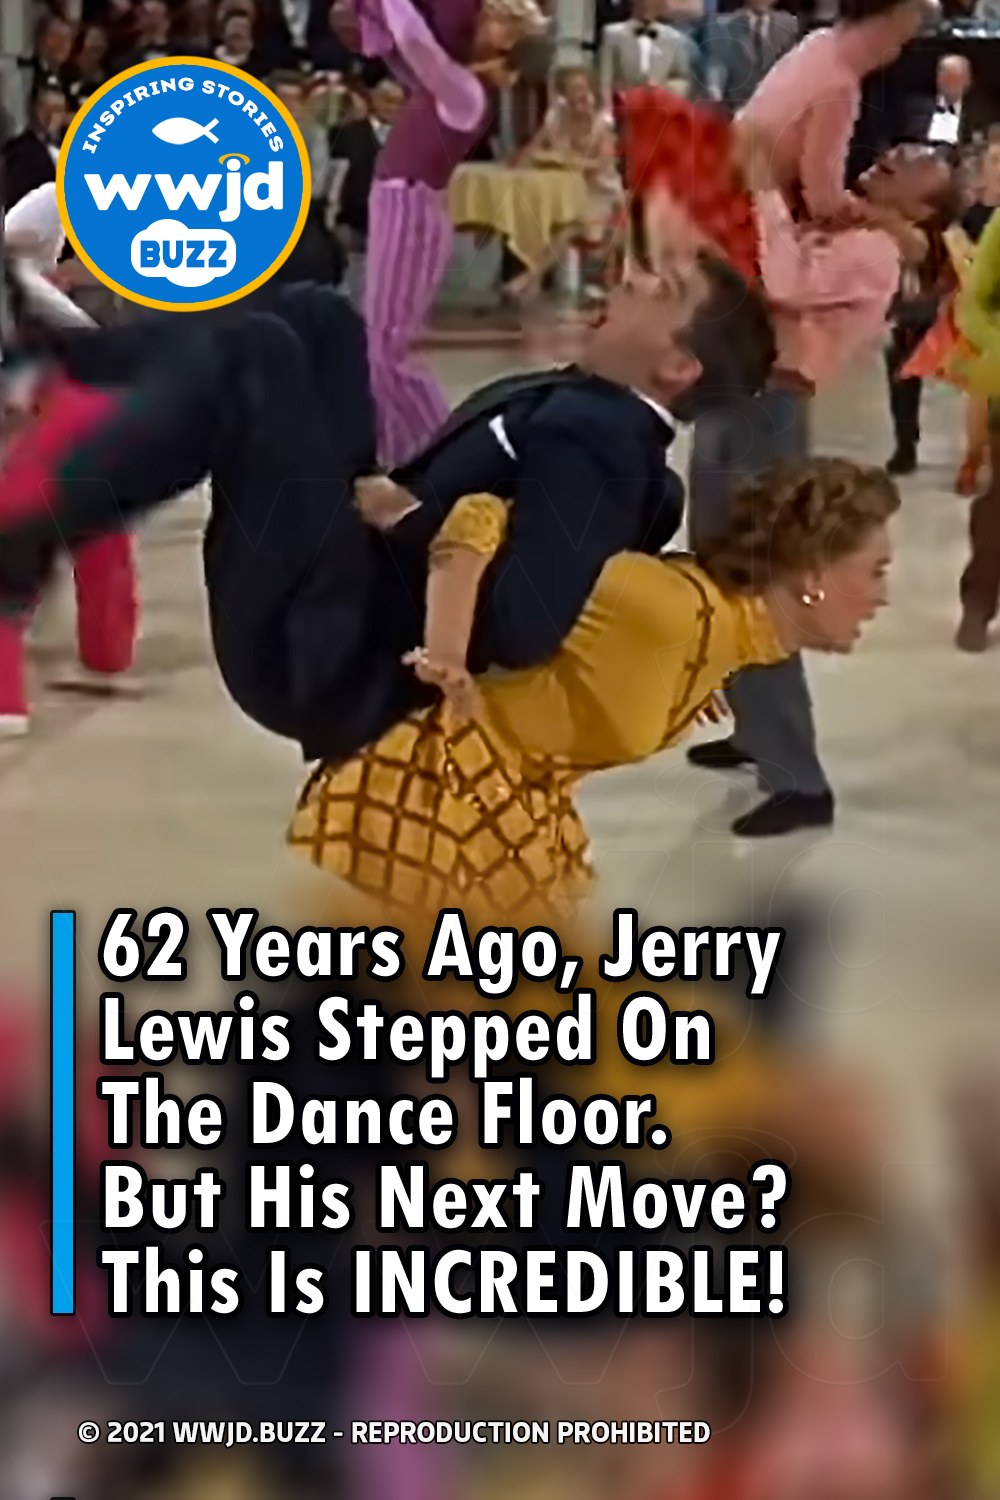 62 Years Ago, Jerry Lewis Stepped On The Dance Floor. But His Next Move? This Is INCREDIBLE!